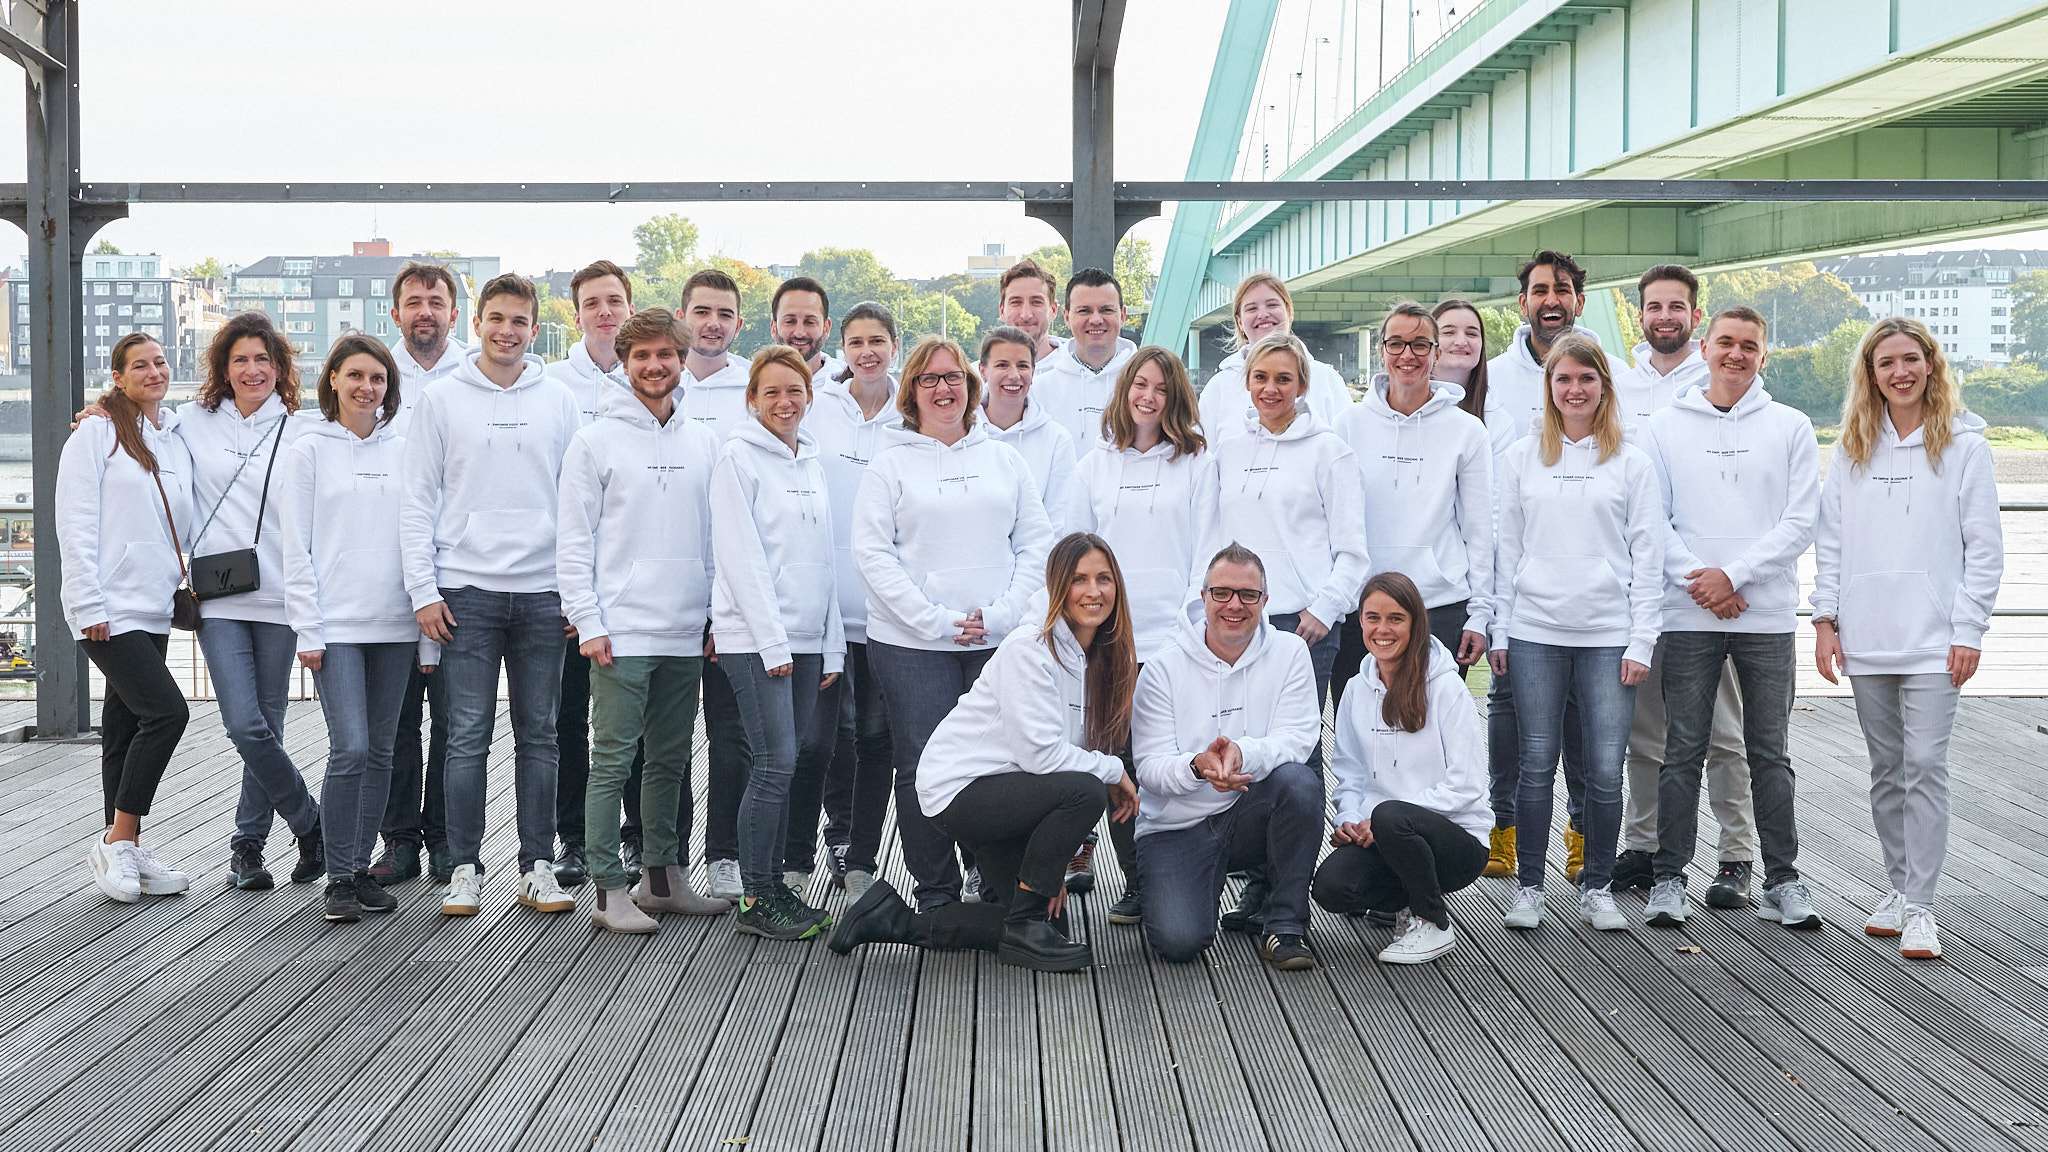 Team Group Consulting, People in Hoodies, White, RecycleMe, RME